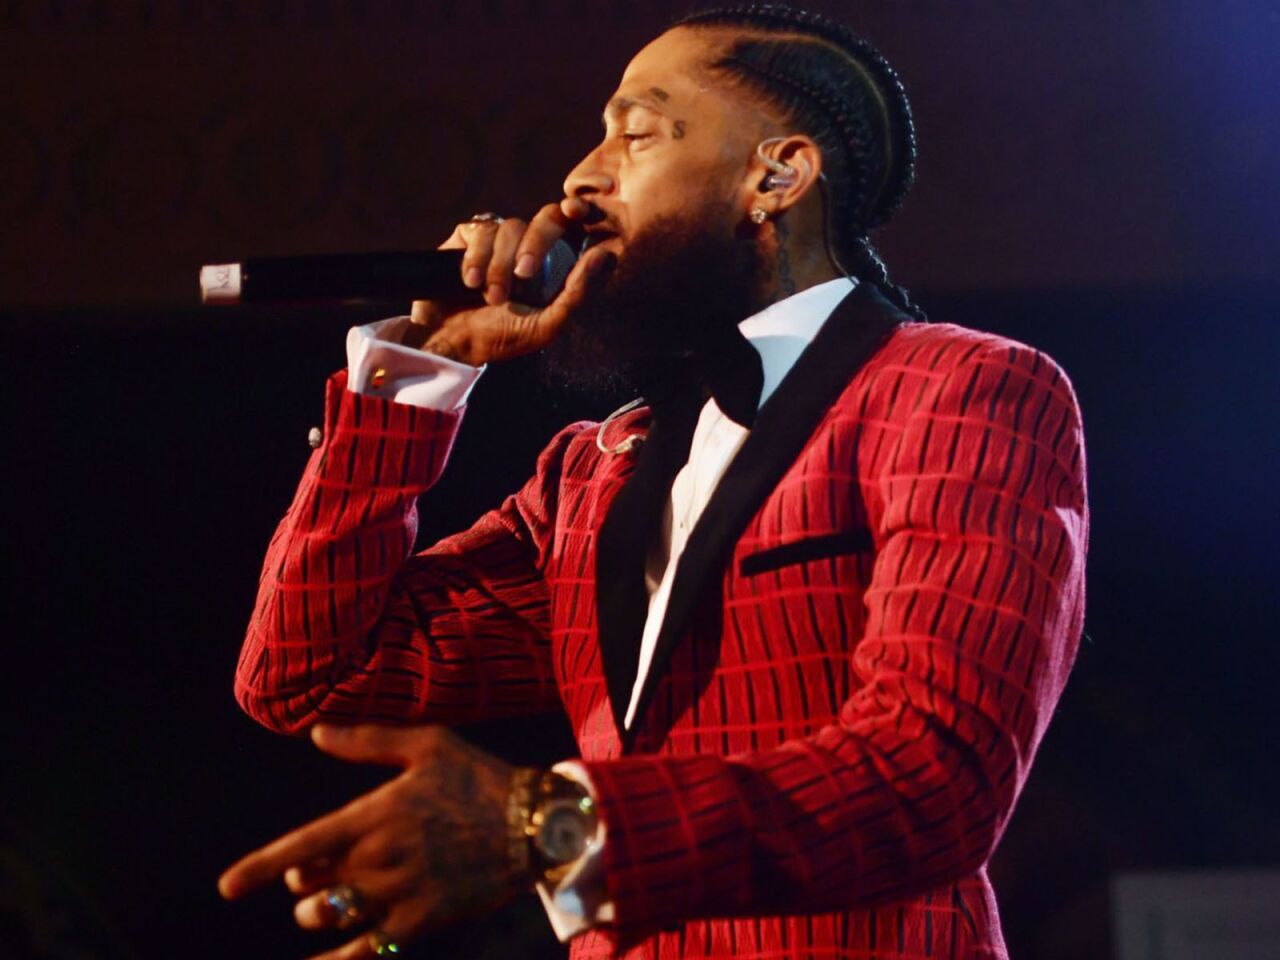 Grammy-nominated rapper Nipsey Hussle was gunned down outside his Marathon Clothing store in the same South L.A. neighborhood where he was known as much for his civic work as he was for his hip-hop music. He was 33.